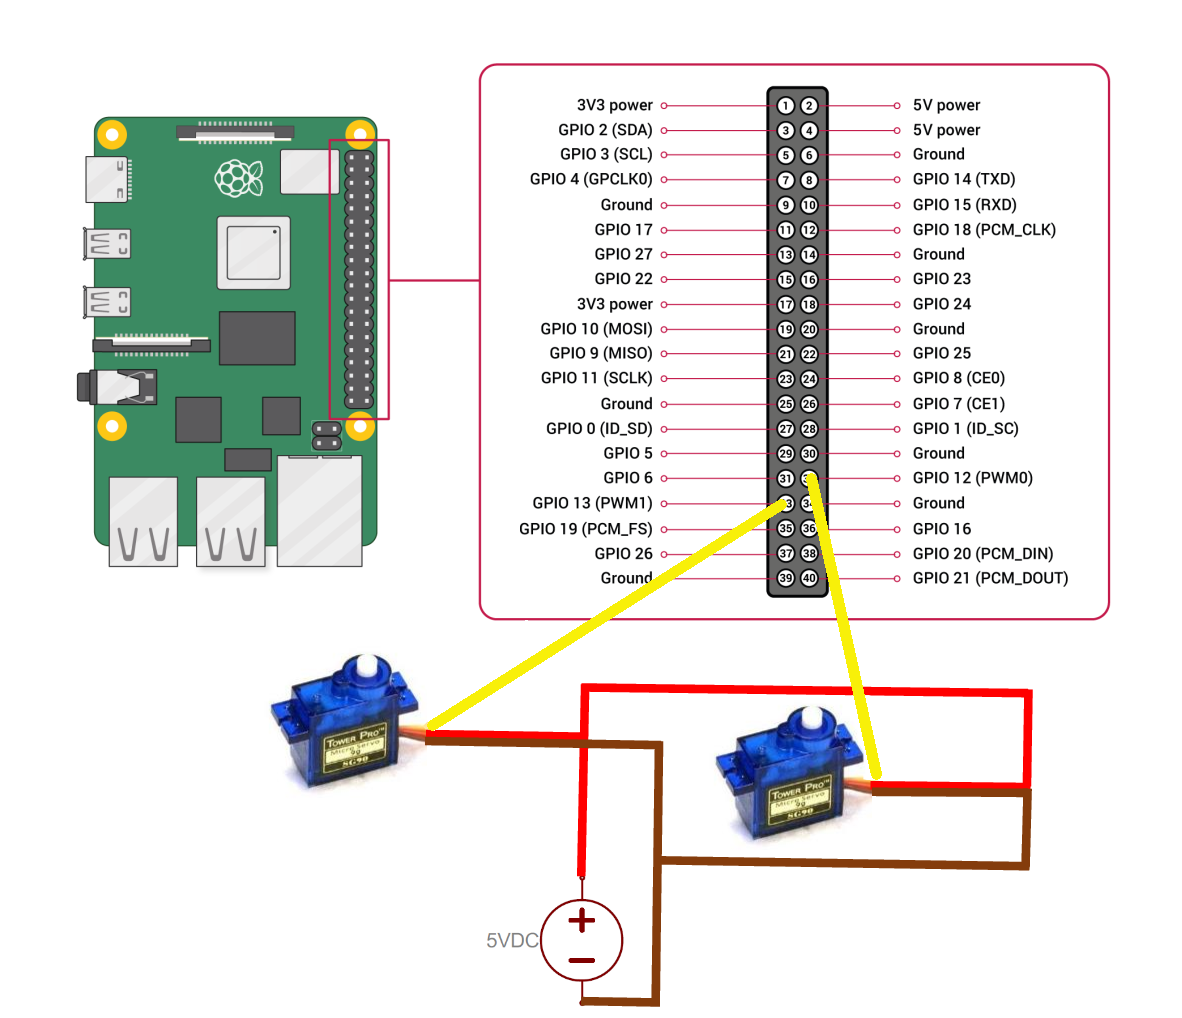 Servos are connected to GPIO 12 and GPIO 13